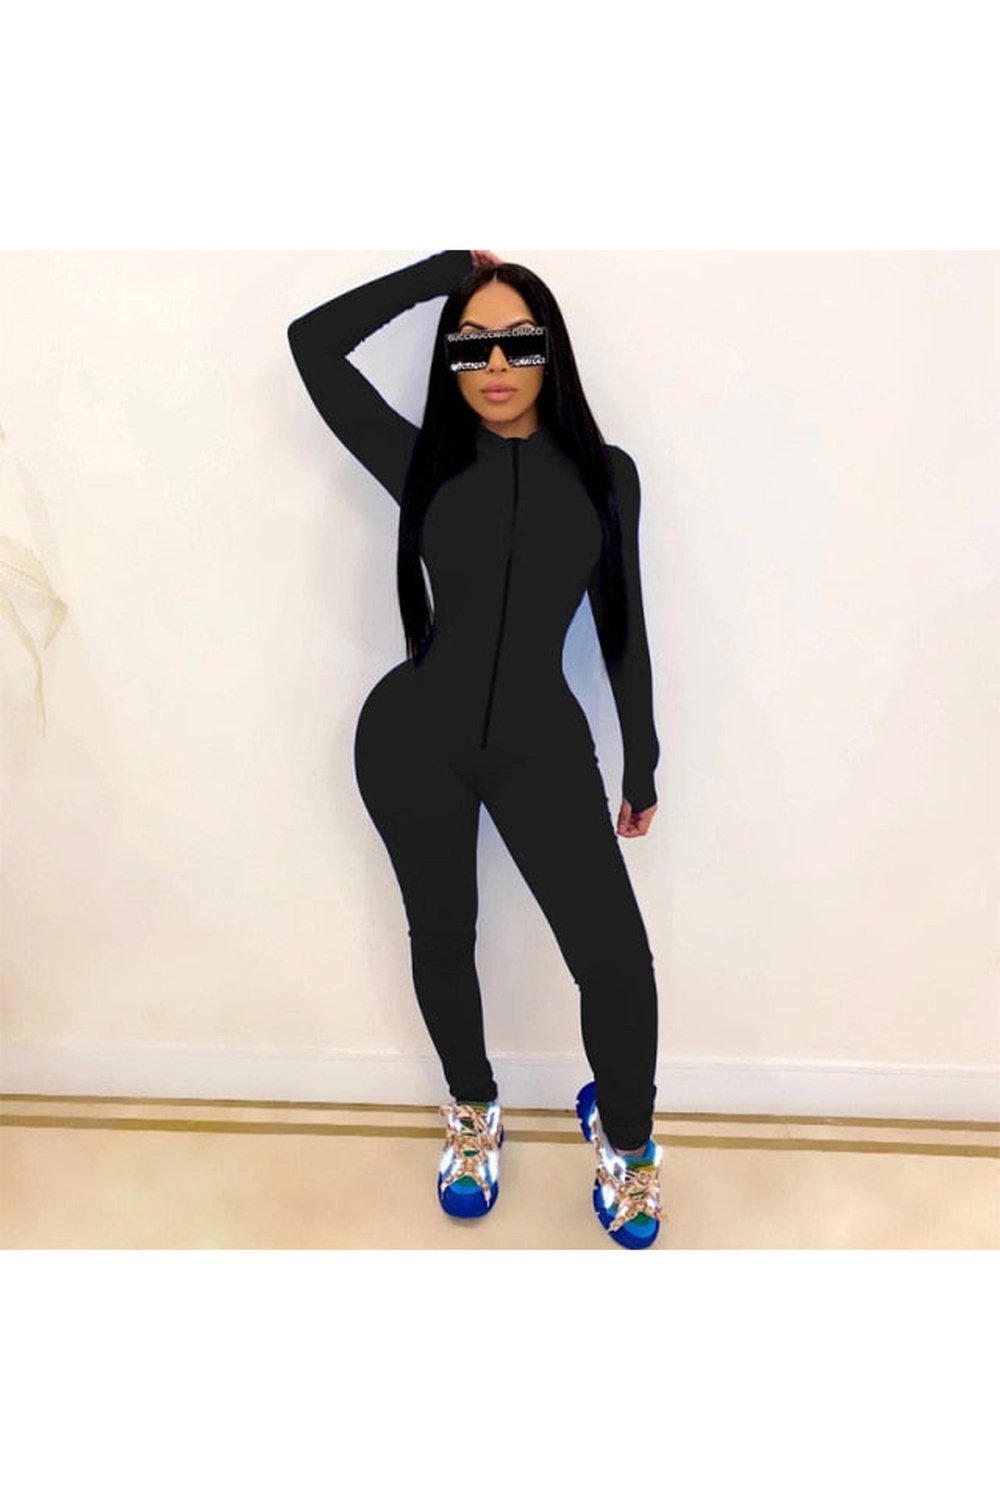 New Style Women Solid Color One Piece Jumpsuit Ladies Zipper Front Long Sleeve